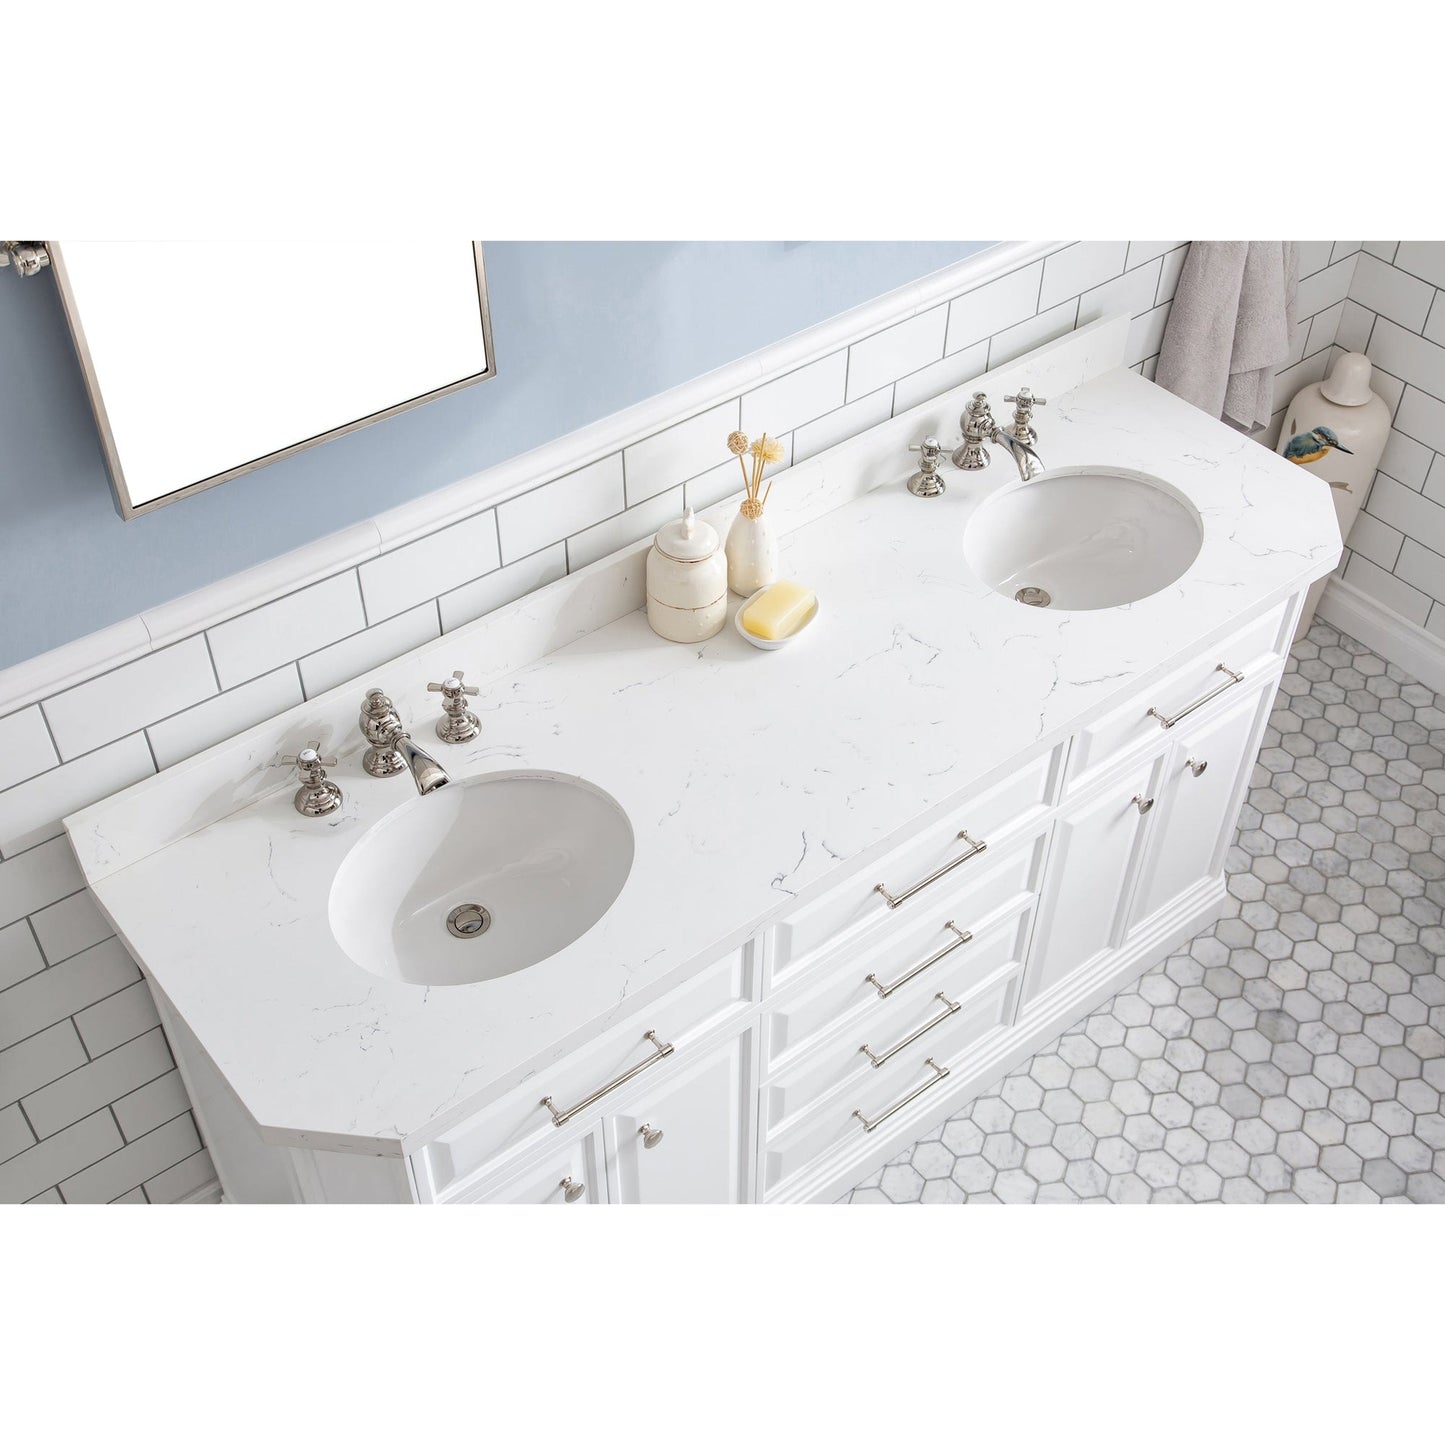 Water Creation Palace 72" Quartz Carrara Pure White Bathroom Vanity Set With Hardware And F2-0013 Faucets, Mirror in Polished Nickel (PVD) Finish